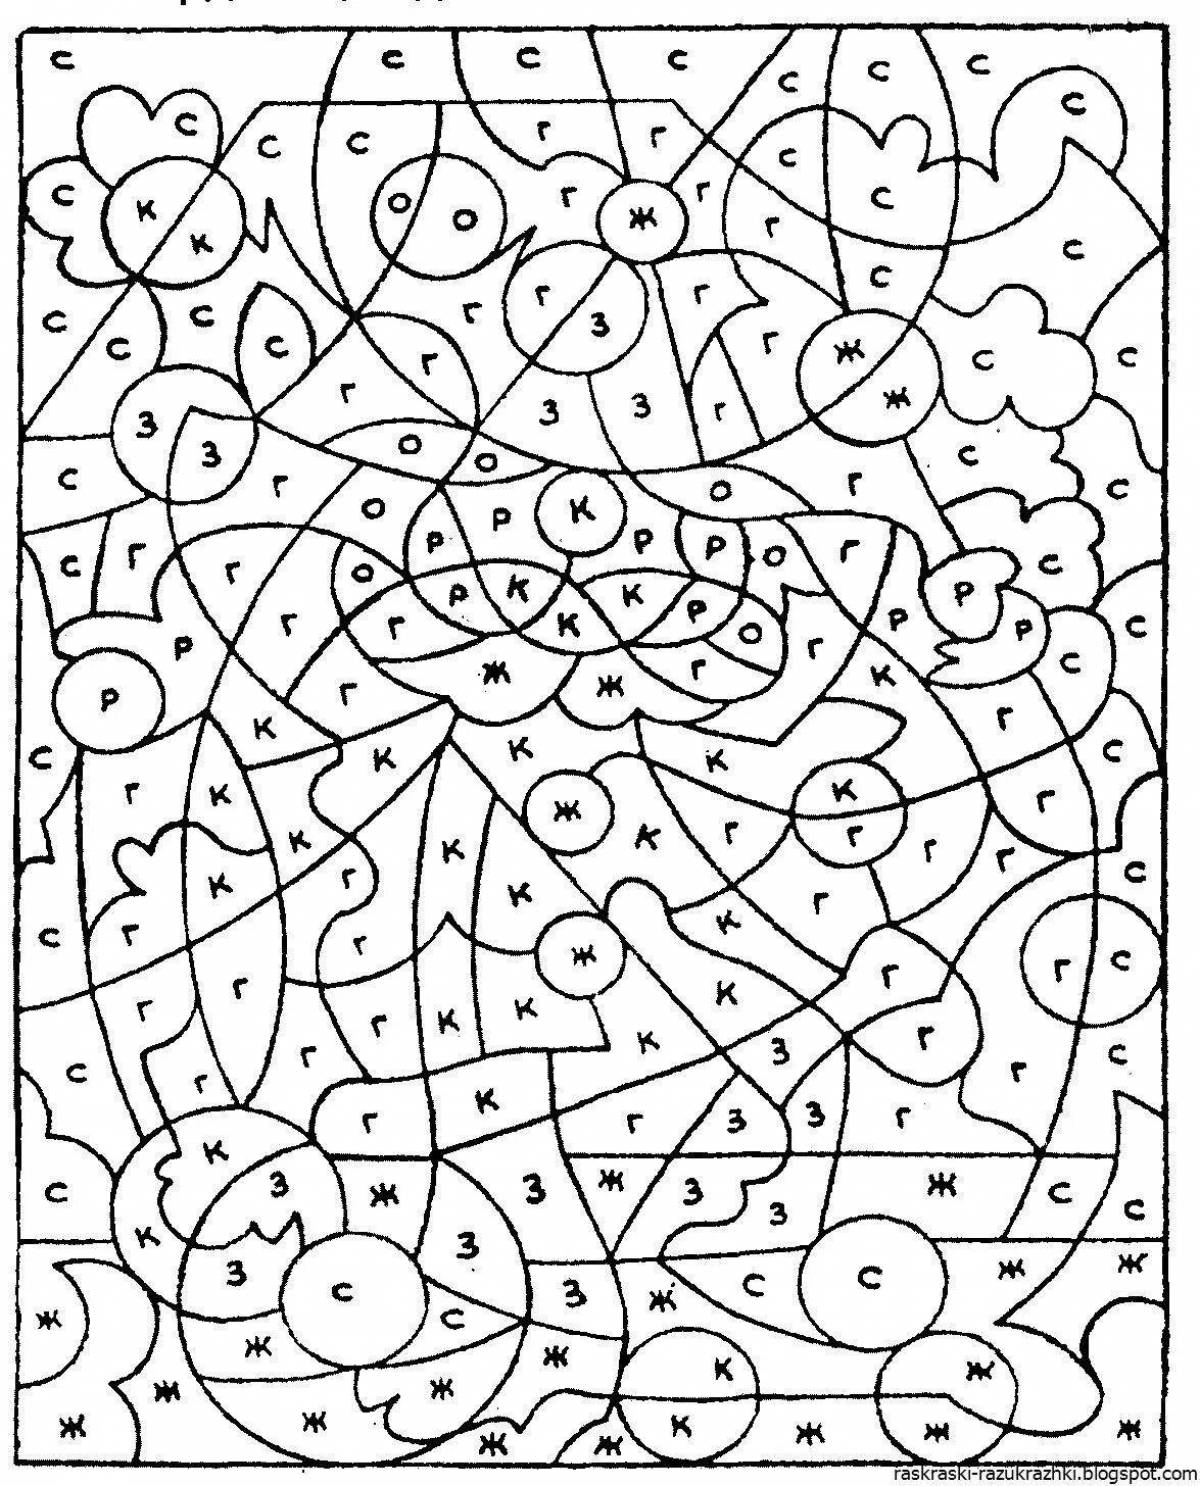 Color-frenzy coloring page for younger students